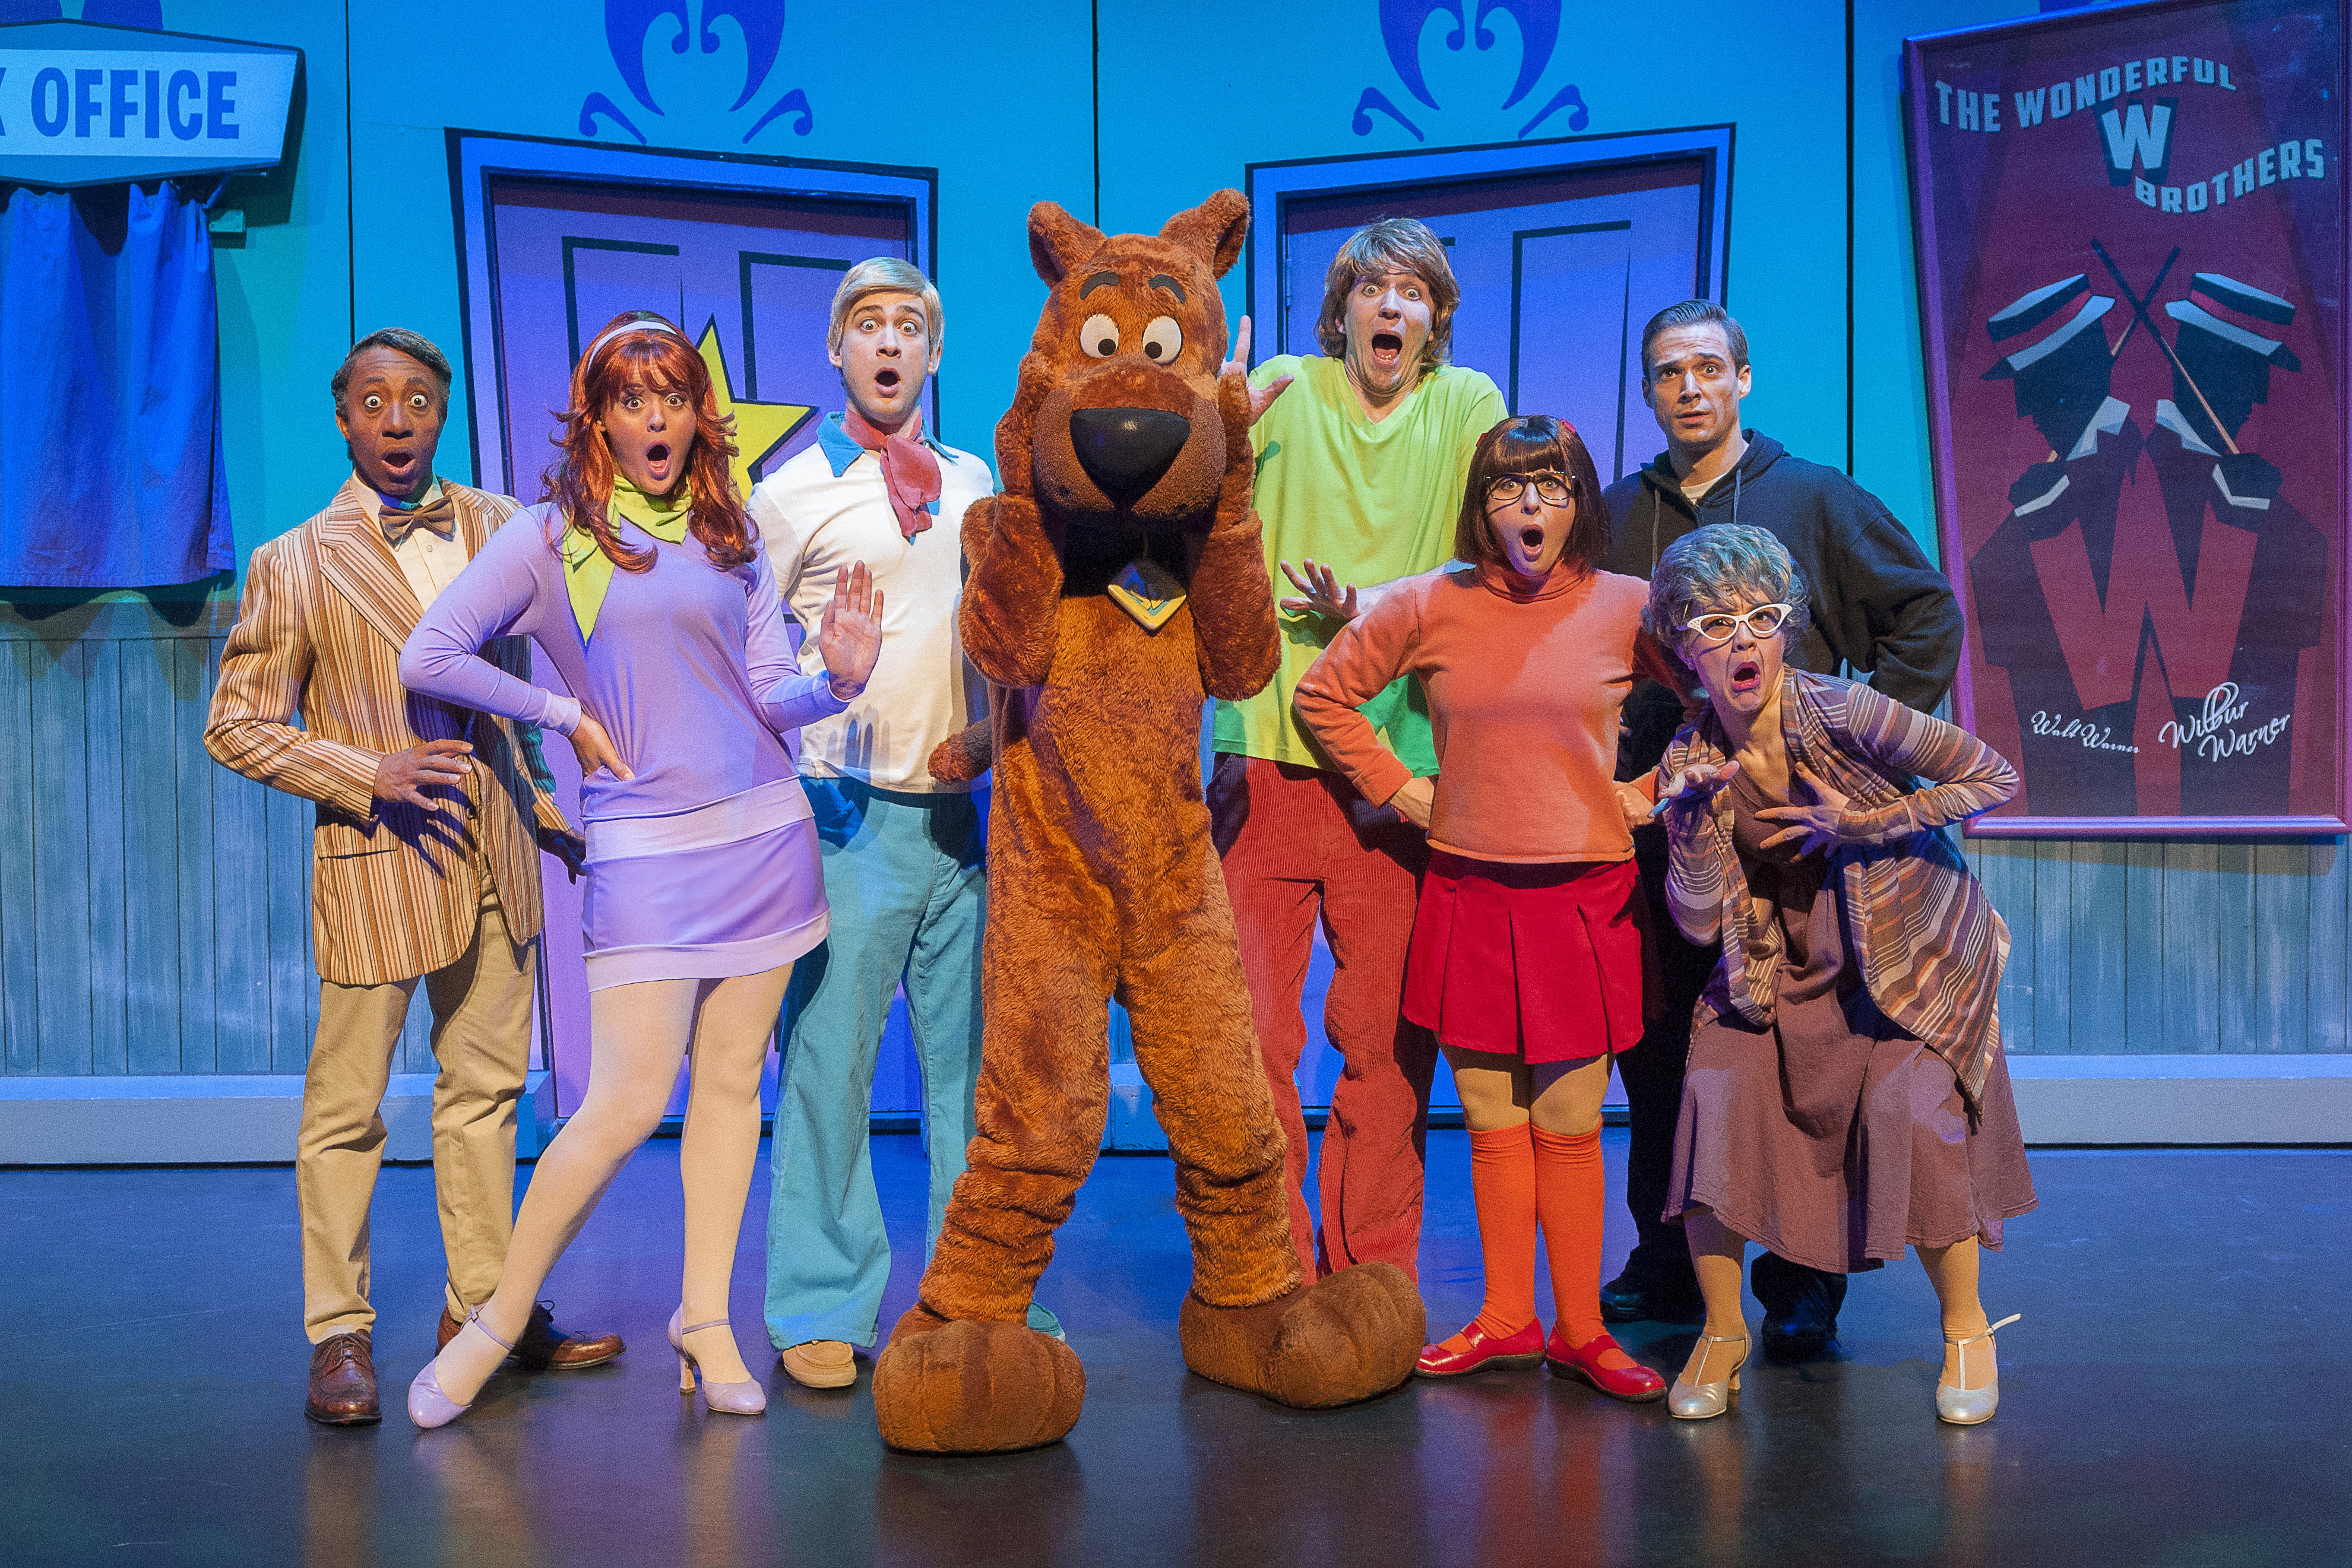 Scooby Doo Live – Musical Mysteries comes to the INEC Killarney on February 11 & 12 2017